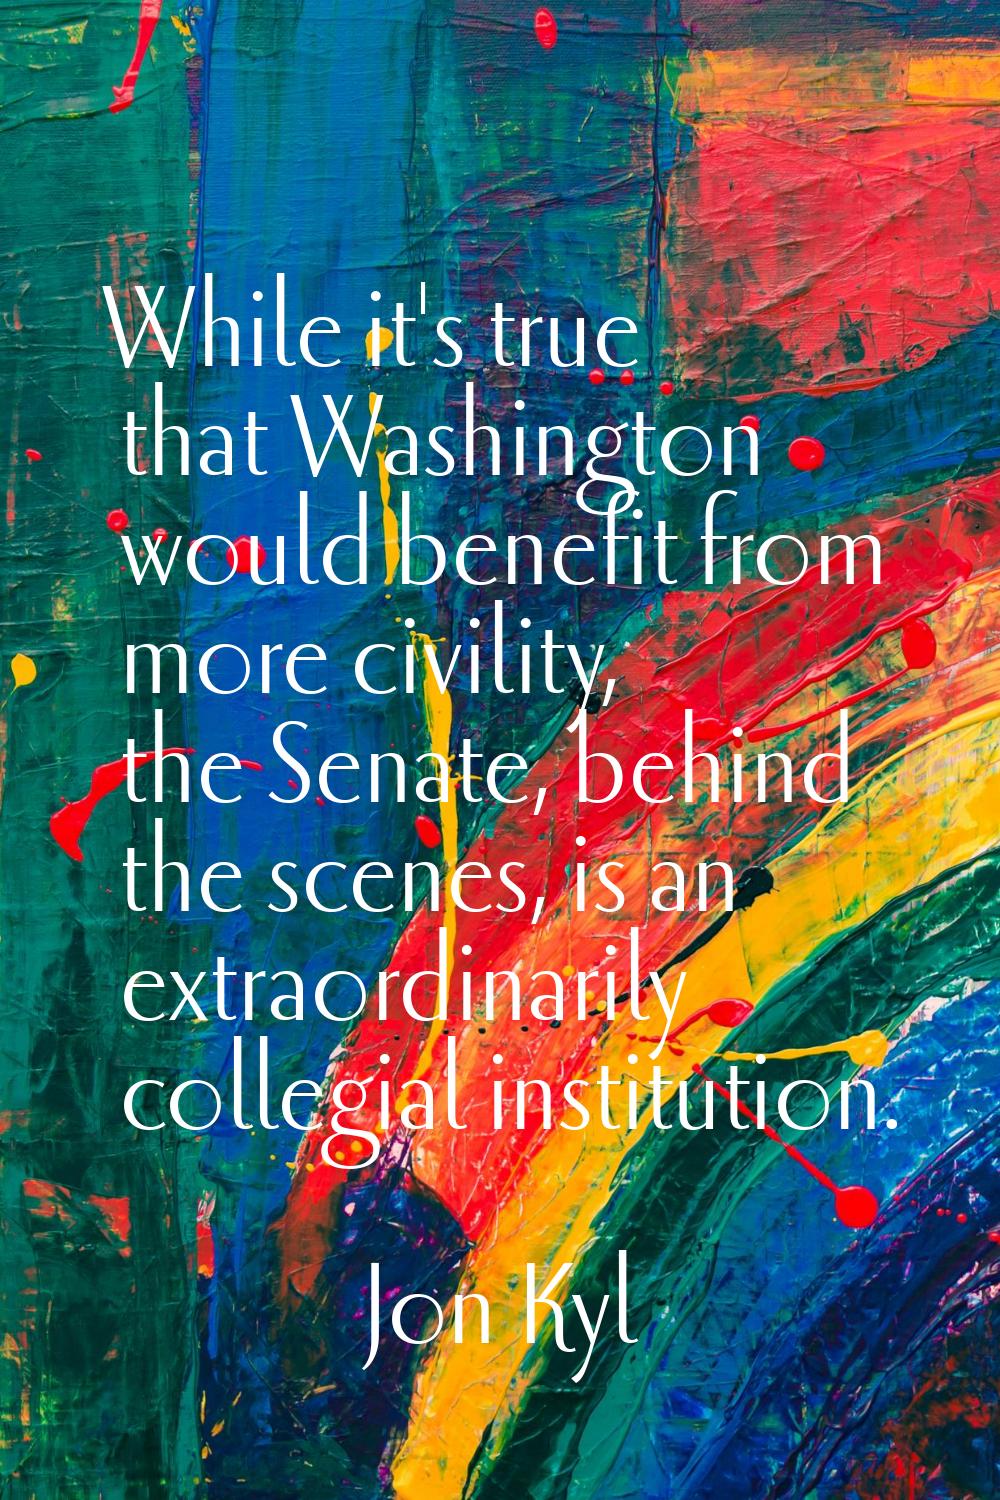 While it's true that Washington would benefit from more civility, the Senate, behind the scenes, is